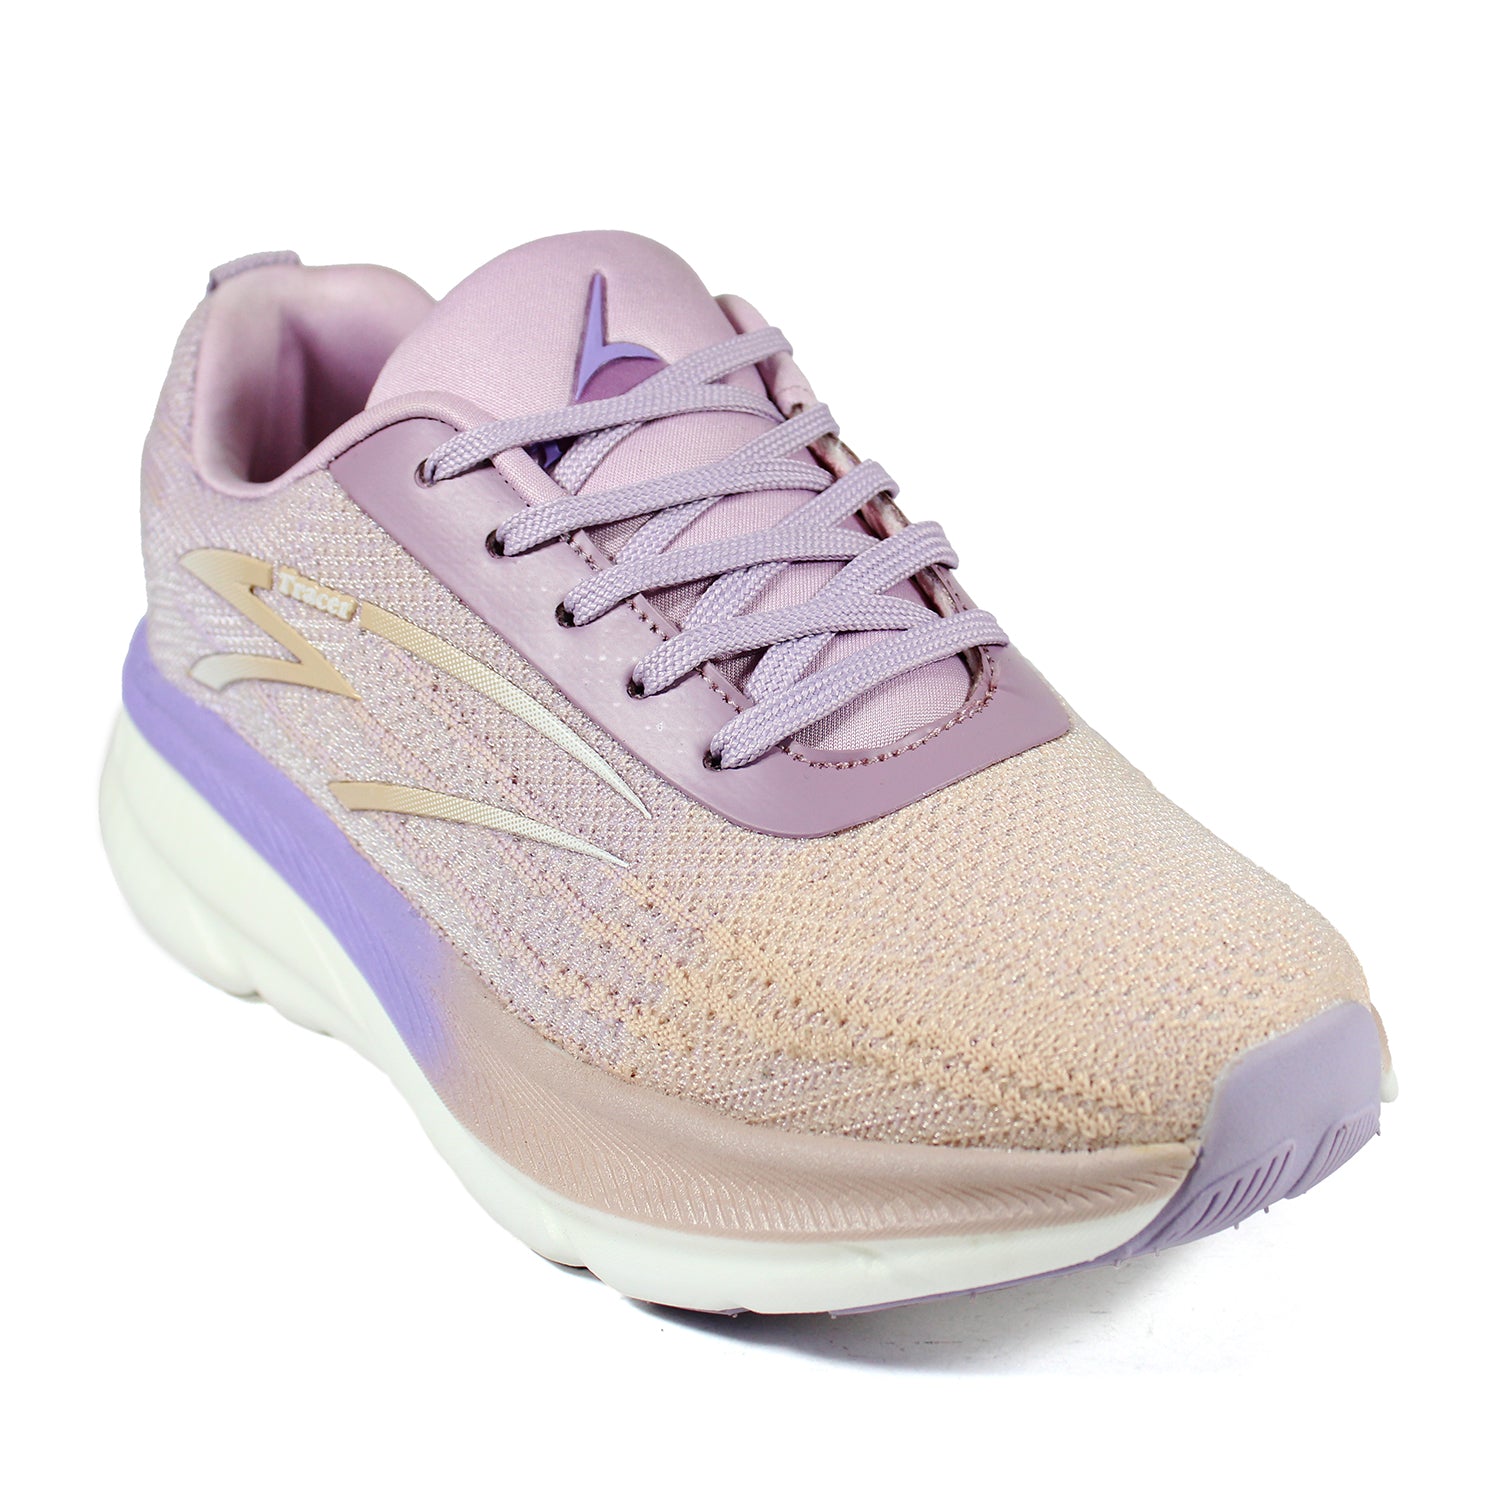 Share 120+ total sports ladies sneakers